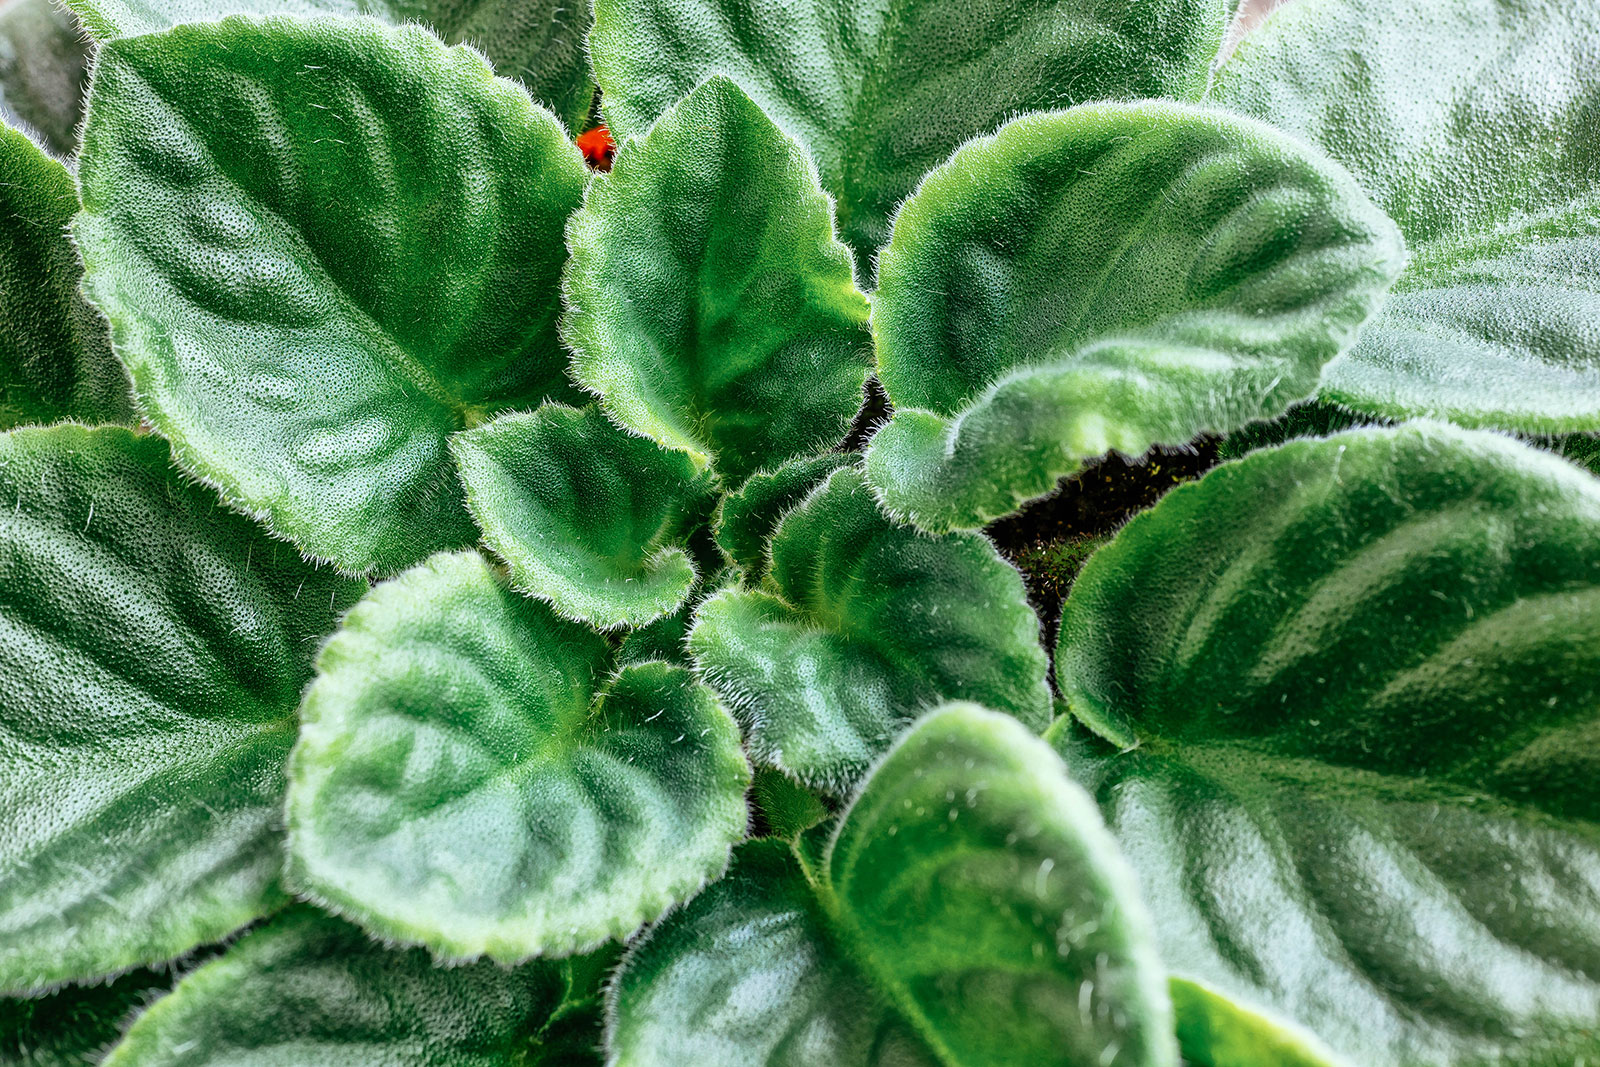 Close-up of glossy, fuzzy, medium-green African violet leaves